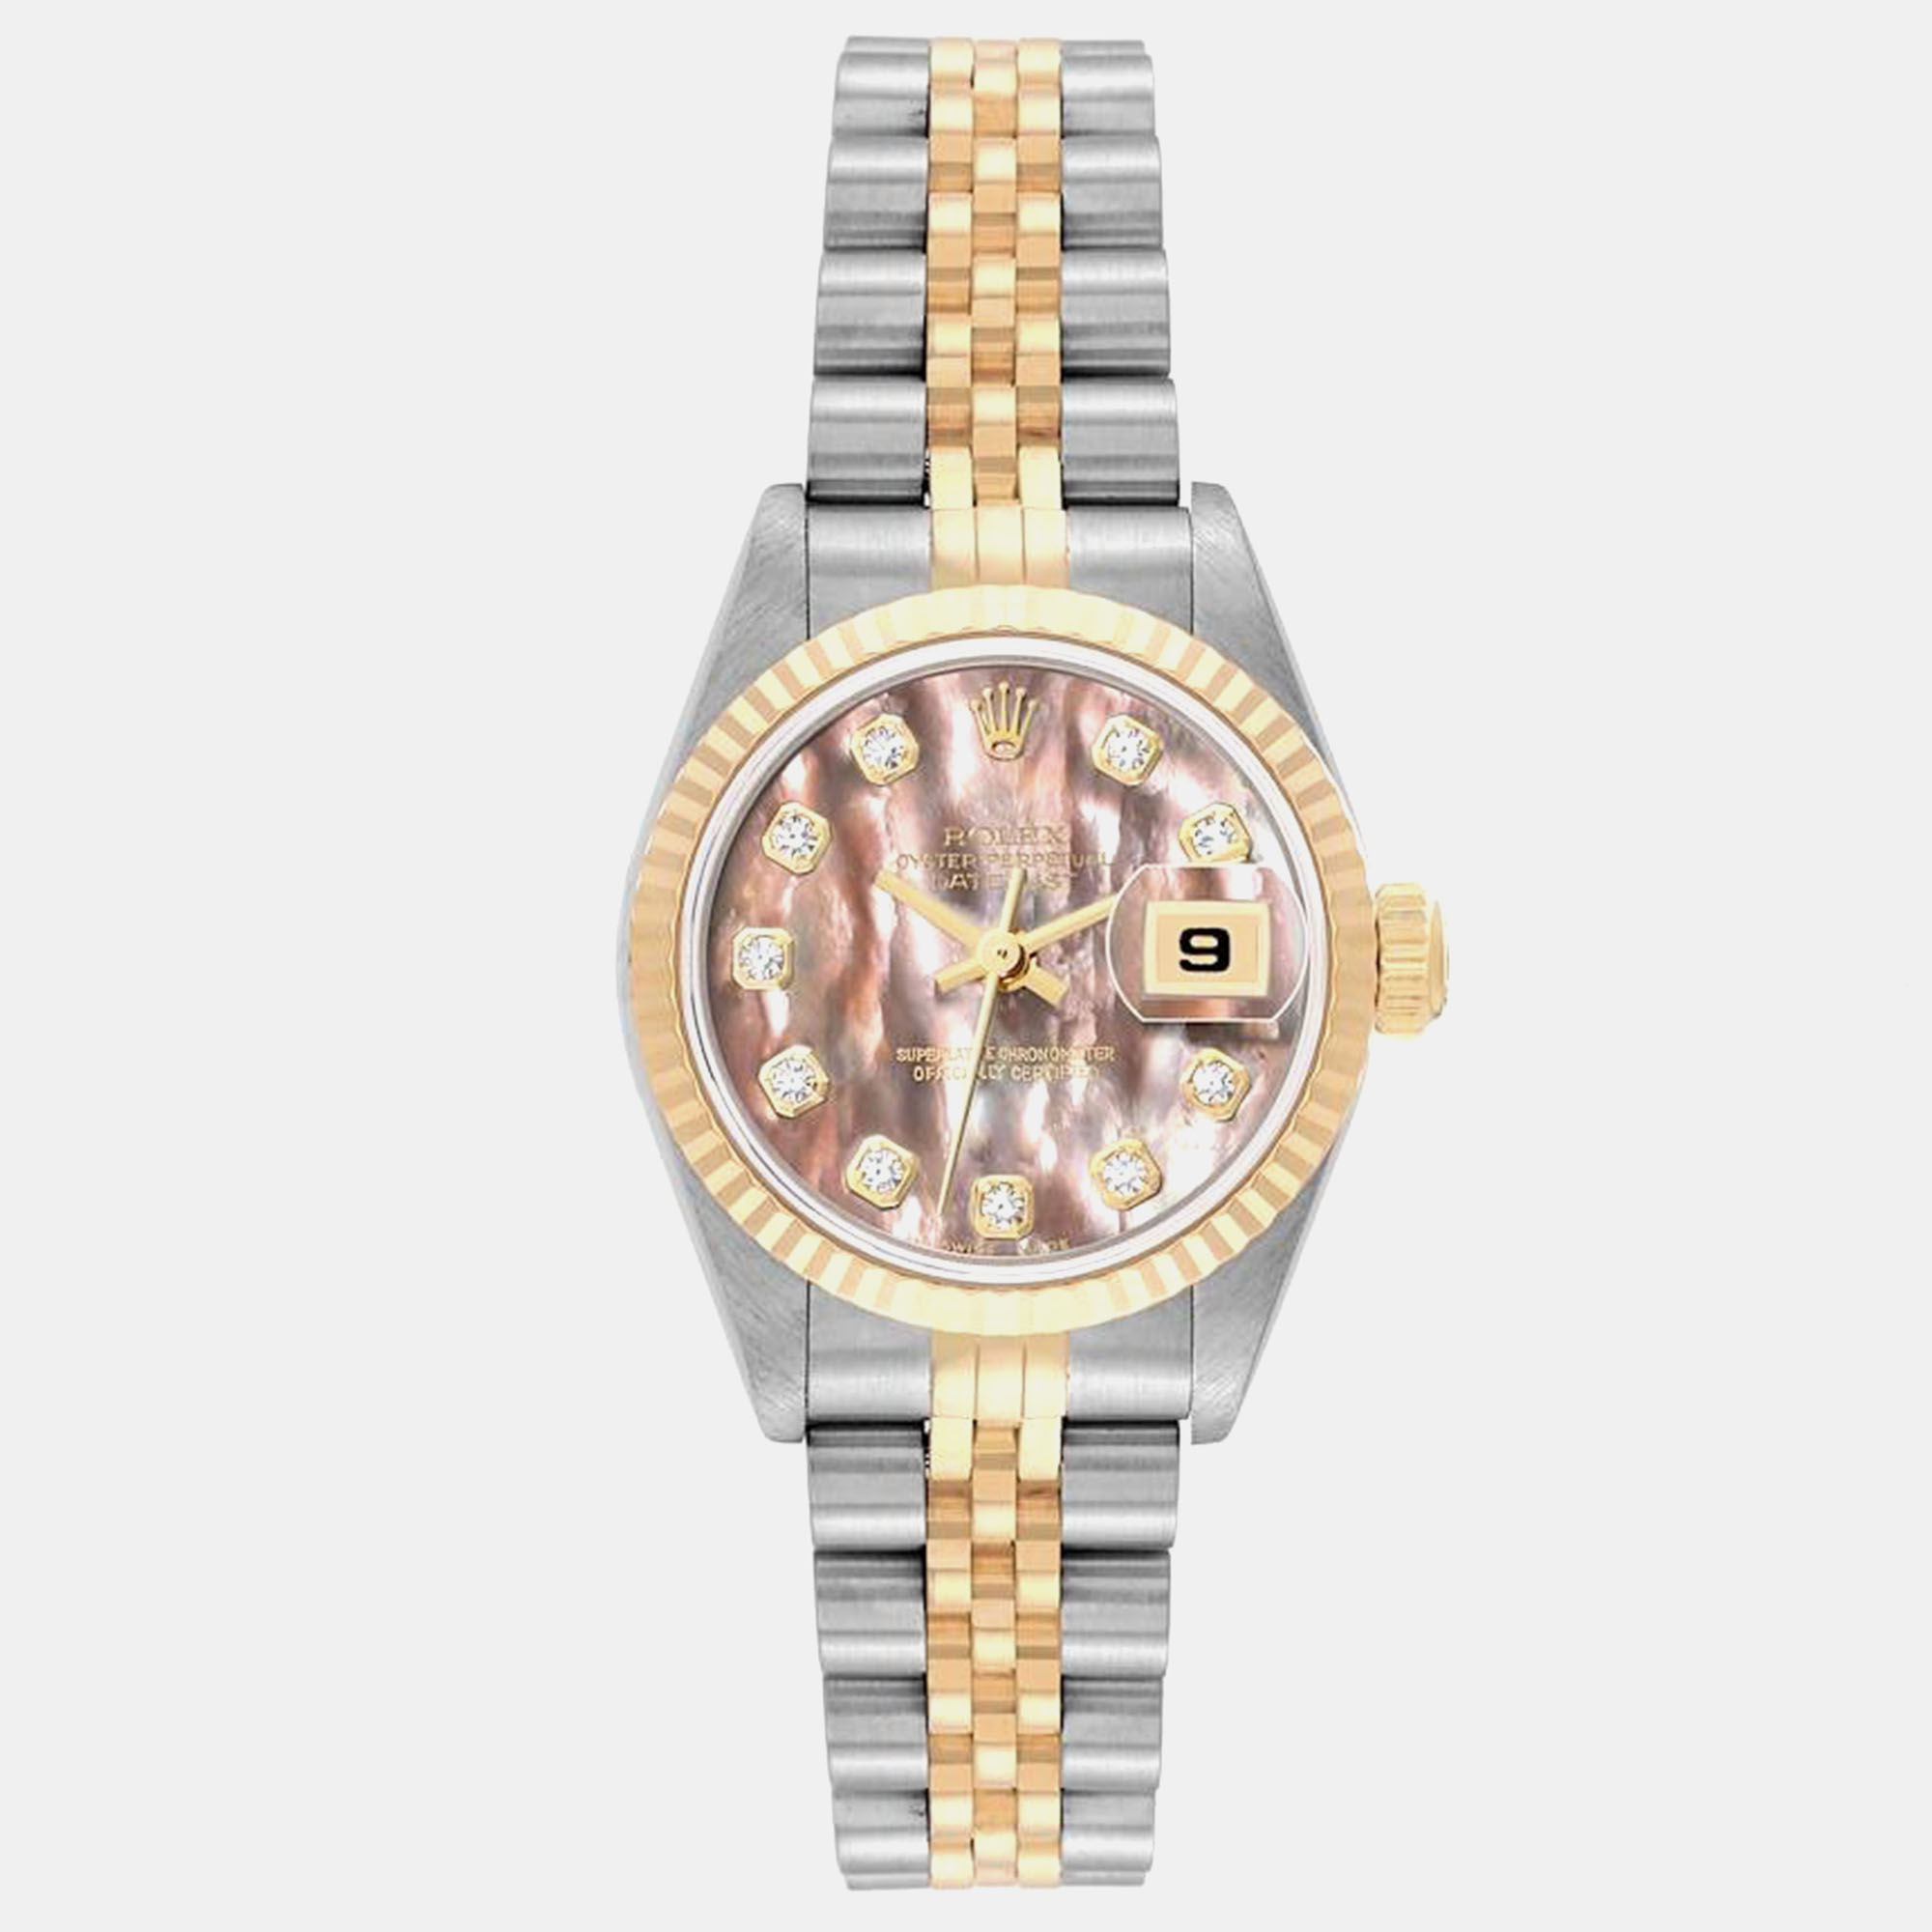 Rolex datejust steel yellow gold mother of pearl diamond ladies watch 26.0 mm